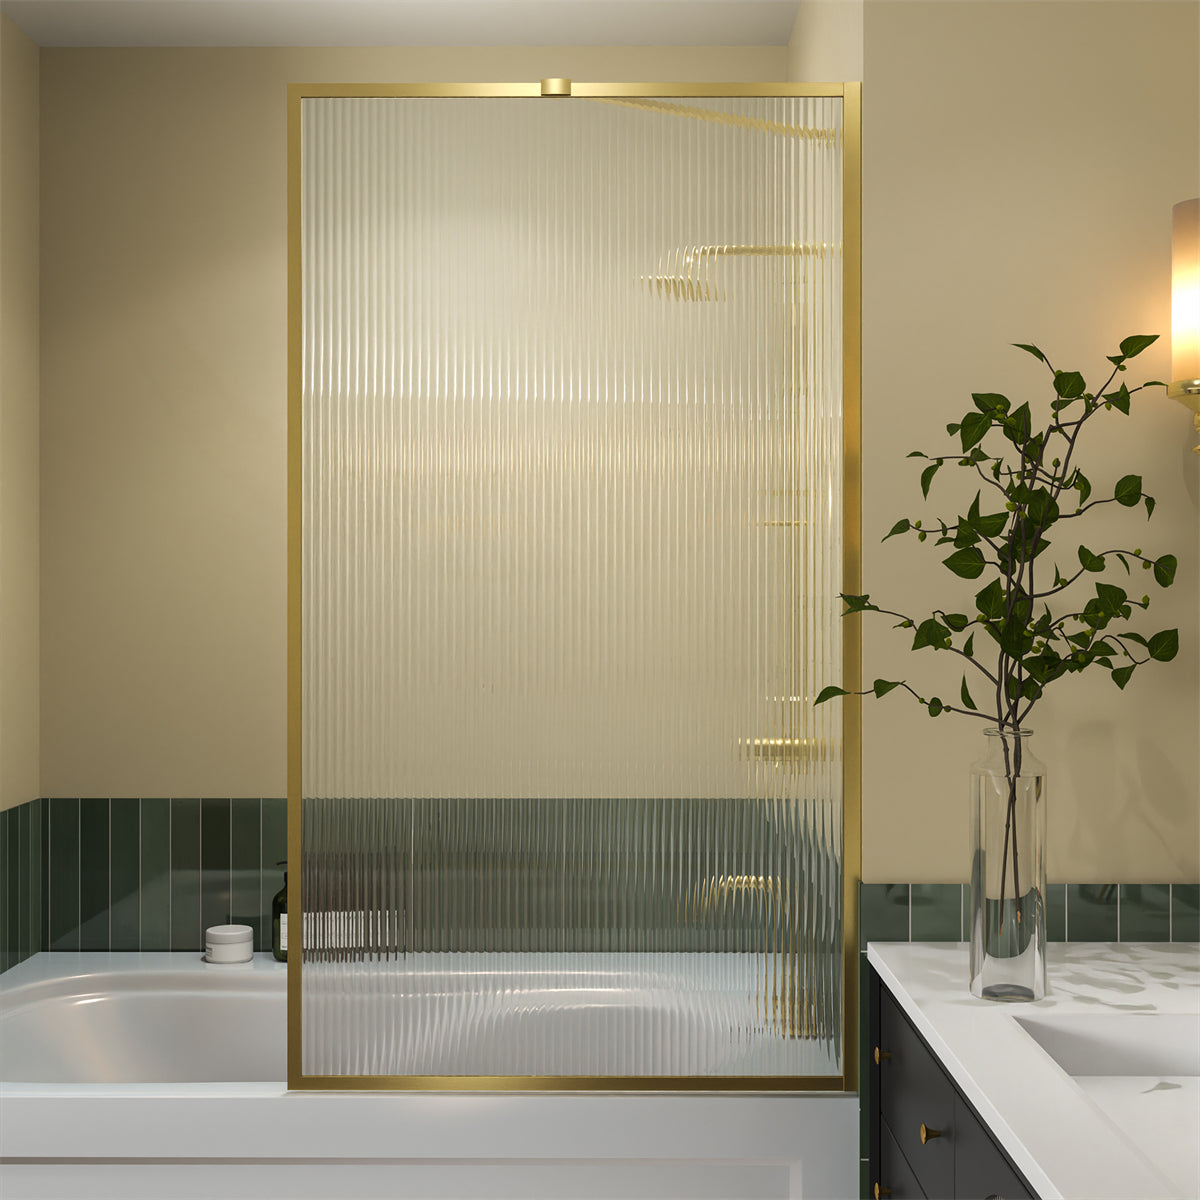 Serenity 33 X 58 Bathtub Screen Reeded Glass Shower Panel For Bathtub,Brushed Gold Finish,Reversible Installation,Square